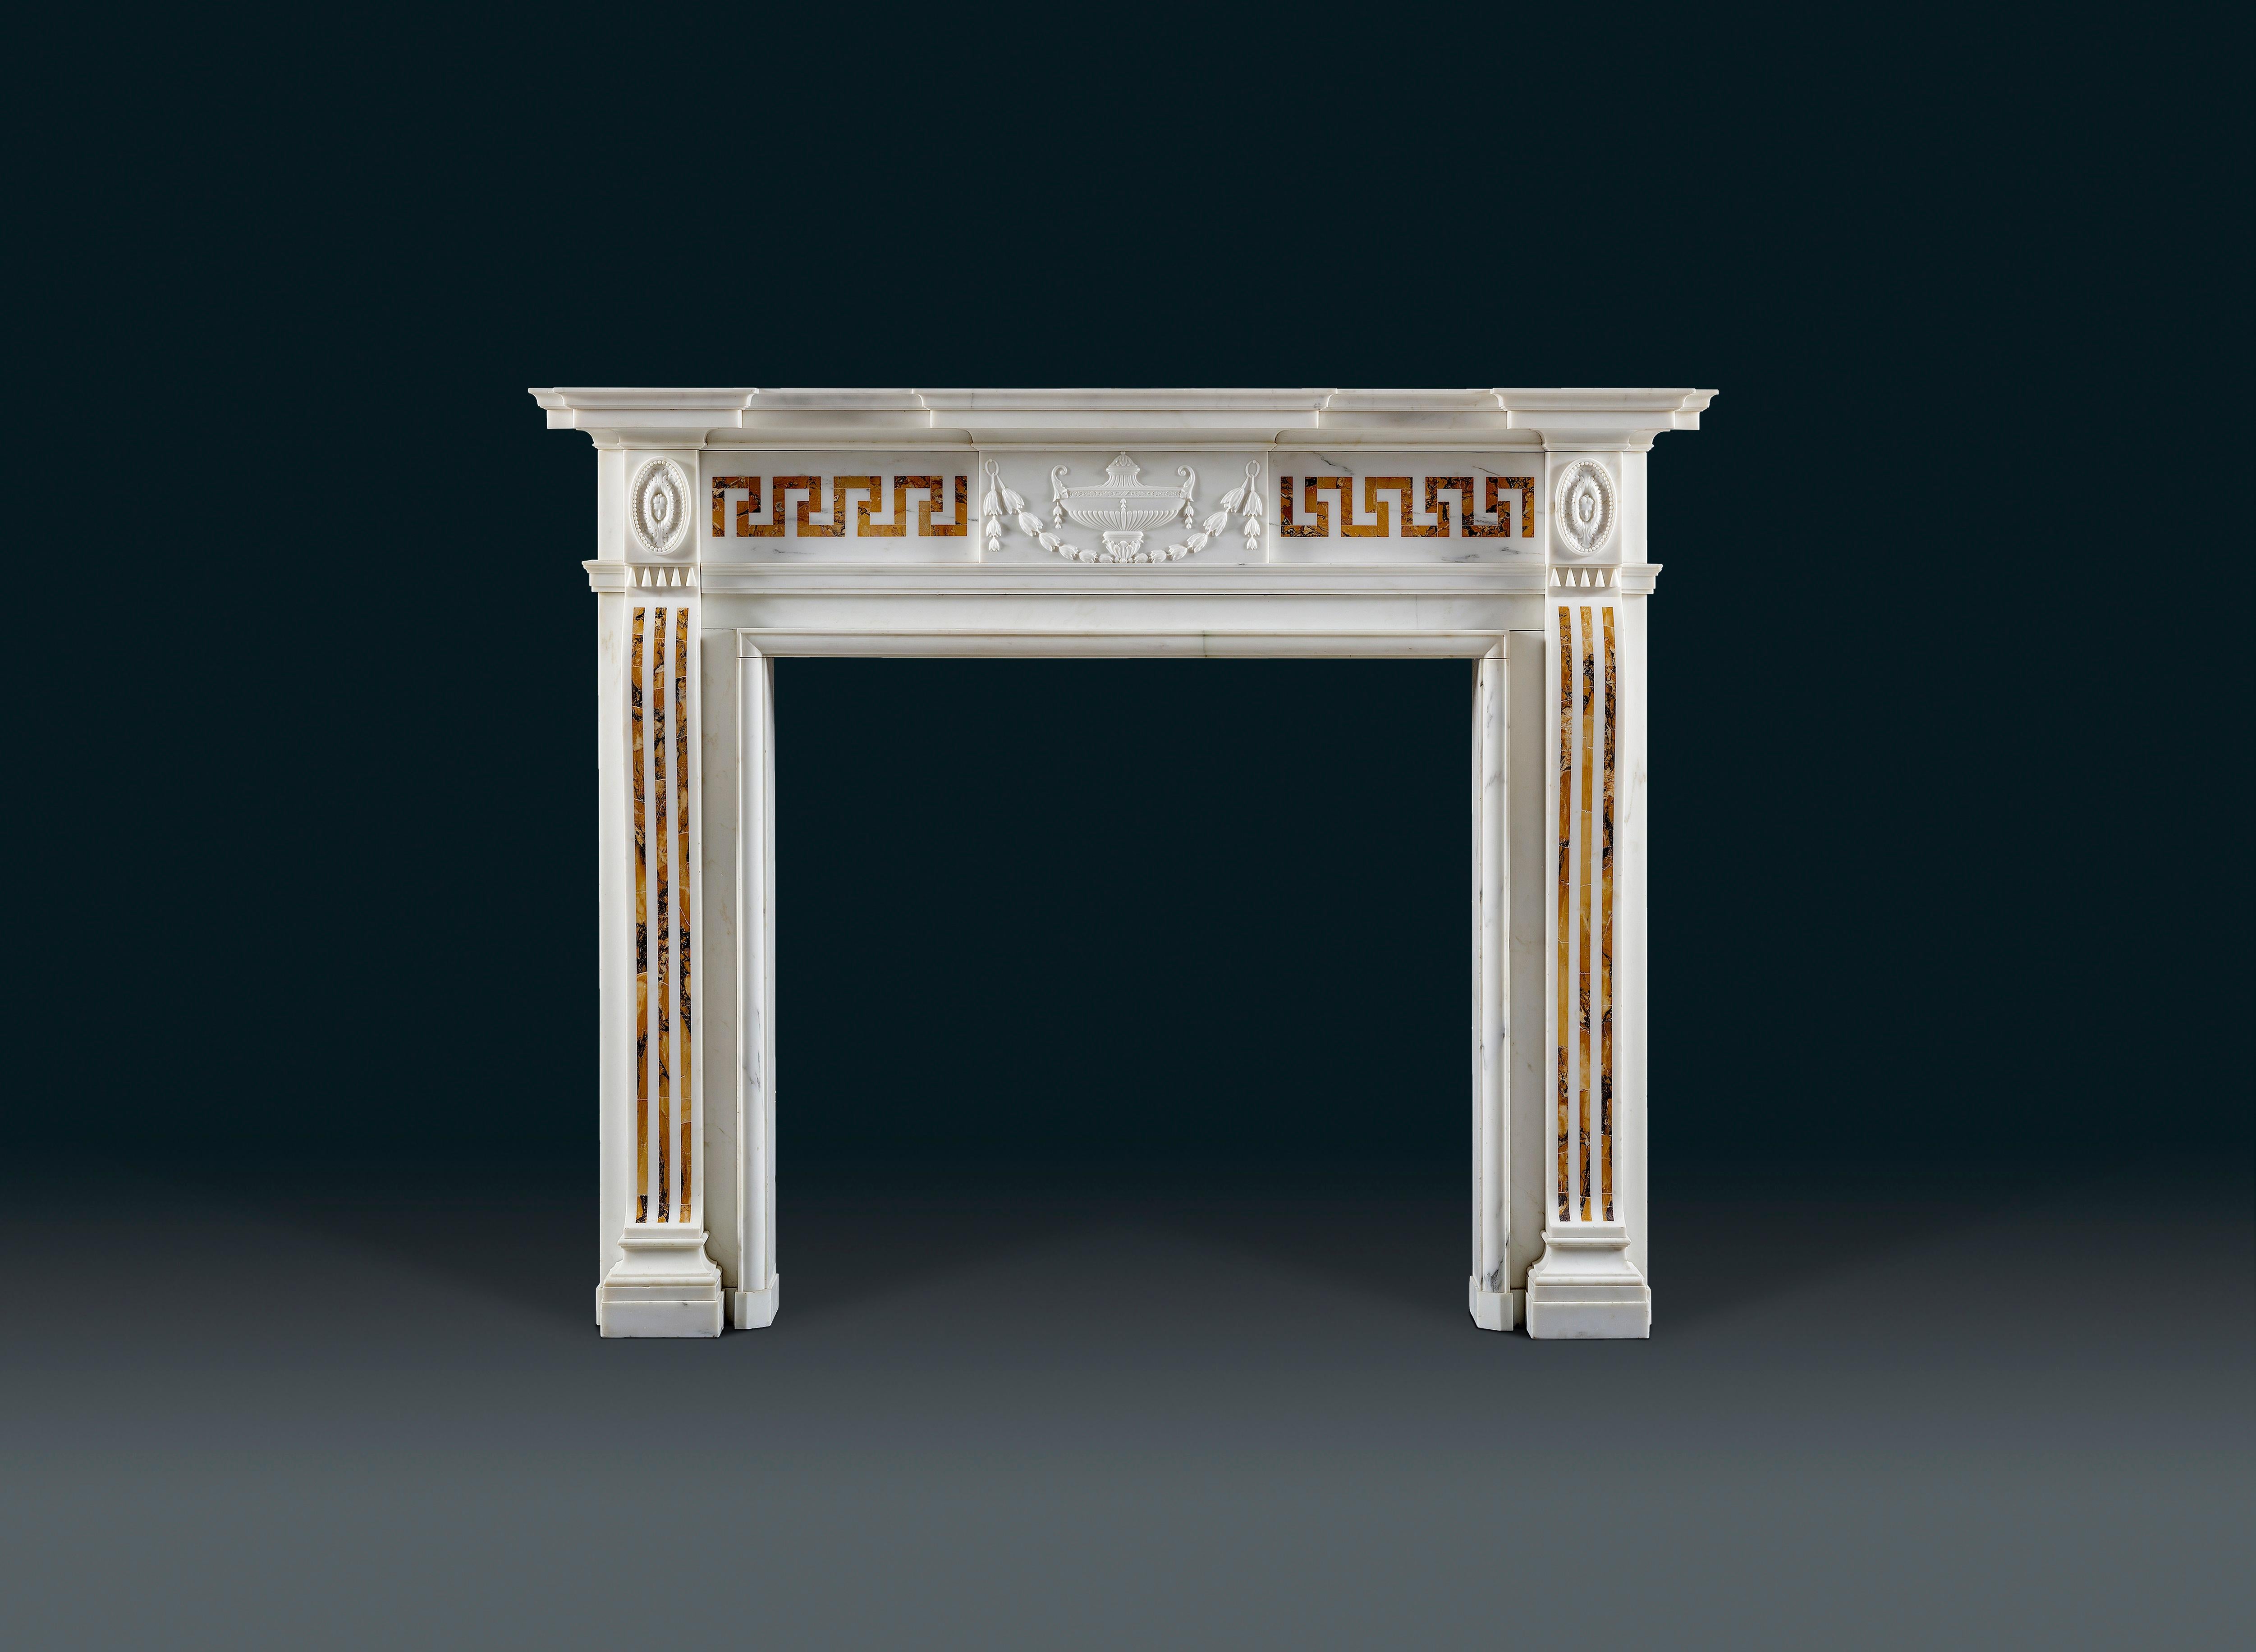 A late 18th century statuary and Siena fireplace of late 18th century neoclassical design, the frieze with a statuary marble tablet decorated a classical urn and swag flanked by Siena inlaid frets, and the console shaped jambs inlaid with Sienna